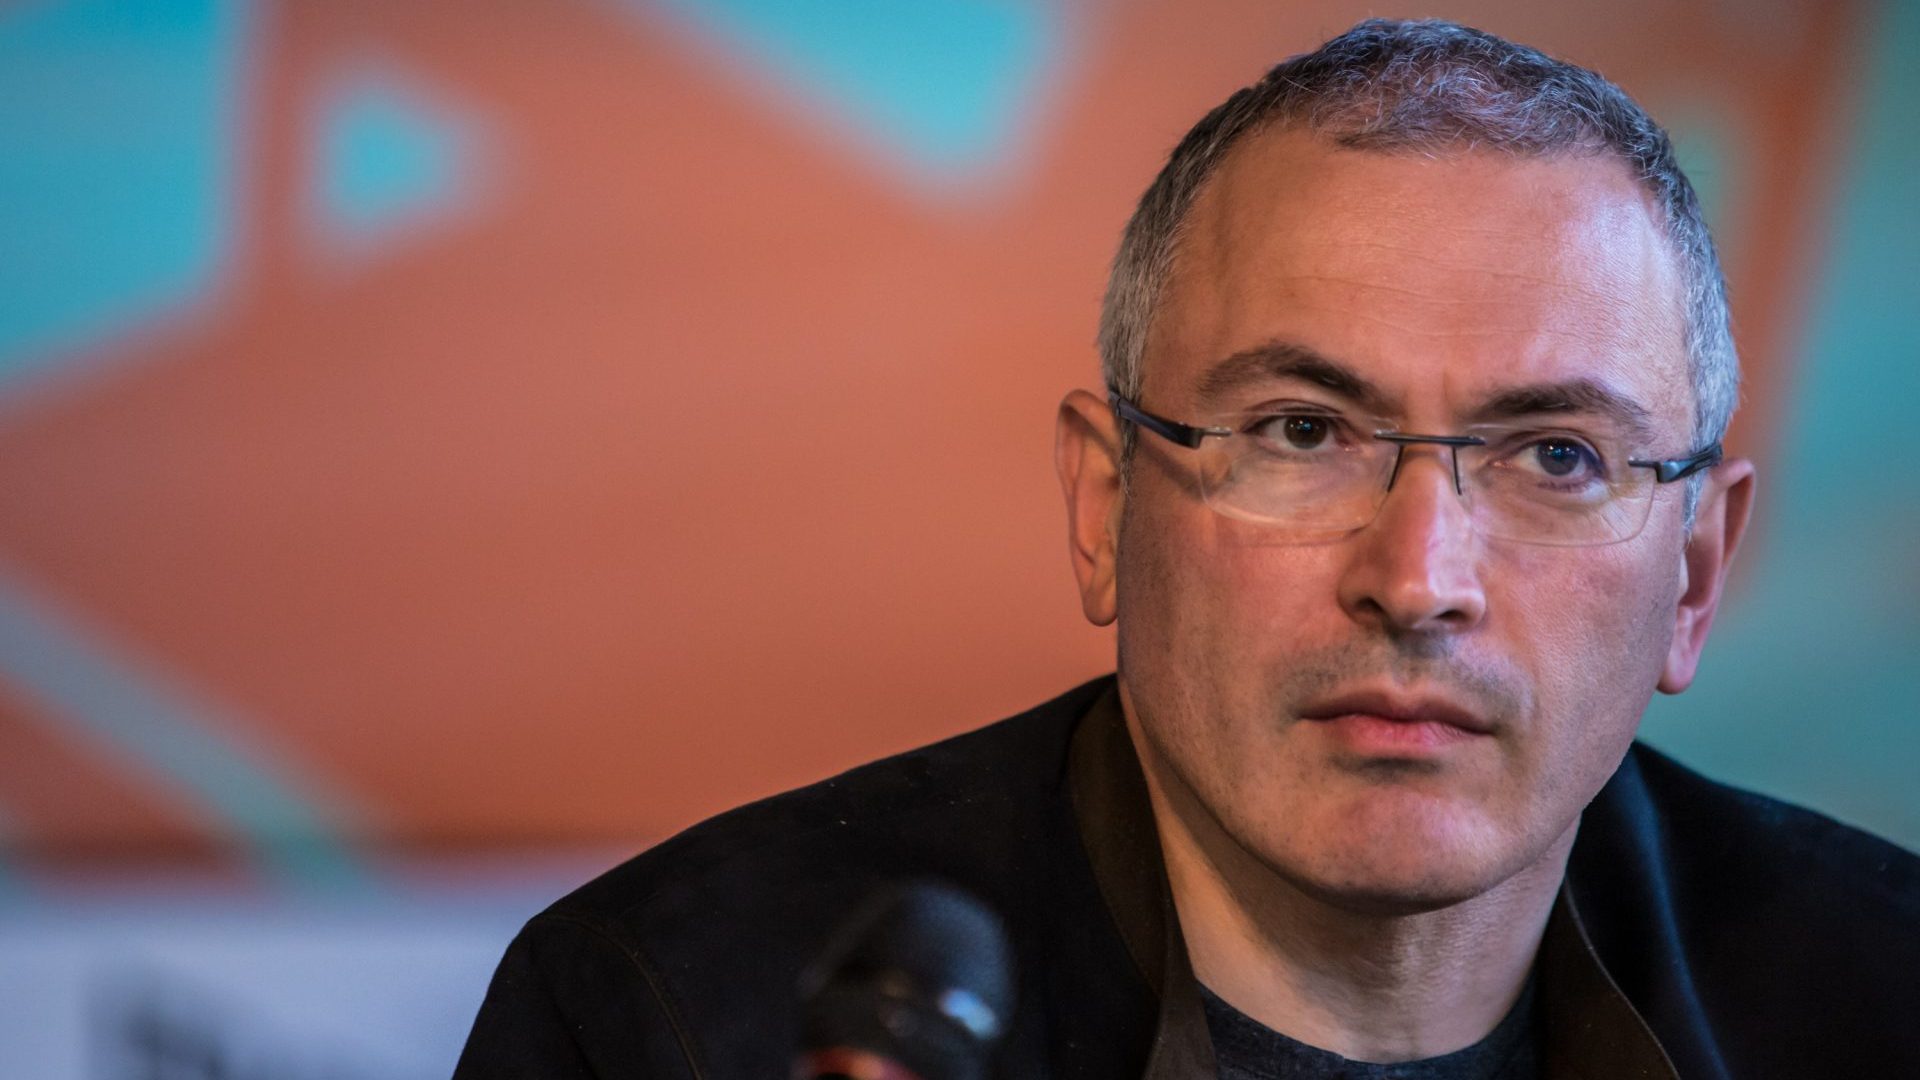 Mikhail Khodorkovsky visiting Eastern Ukraine in 2014 to meet with local businessmen and members of the public regarding the political crisis there. Photo: Brendan Hoffman/Getty Images